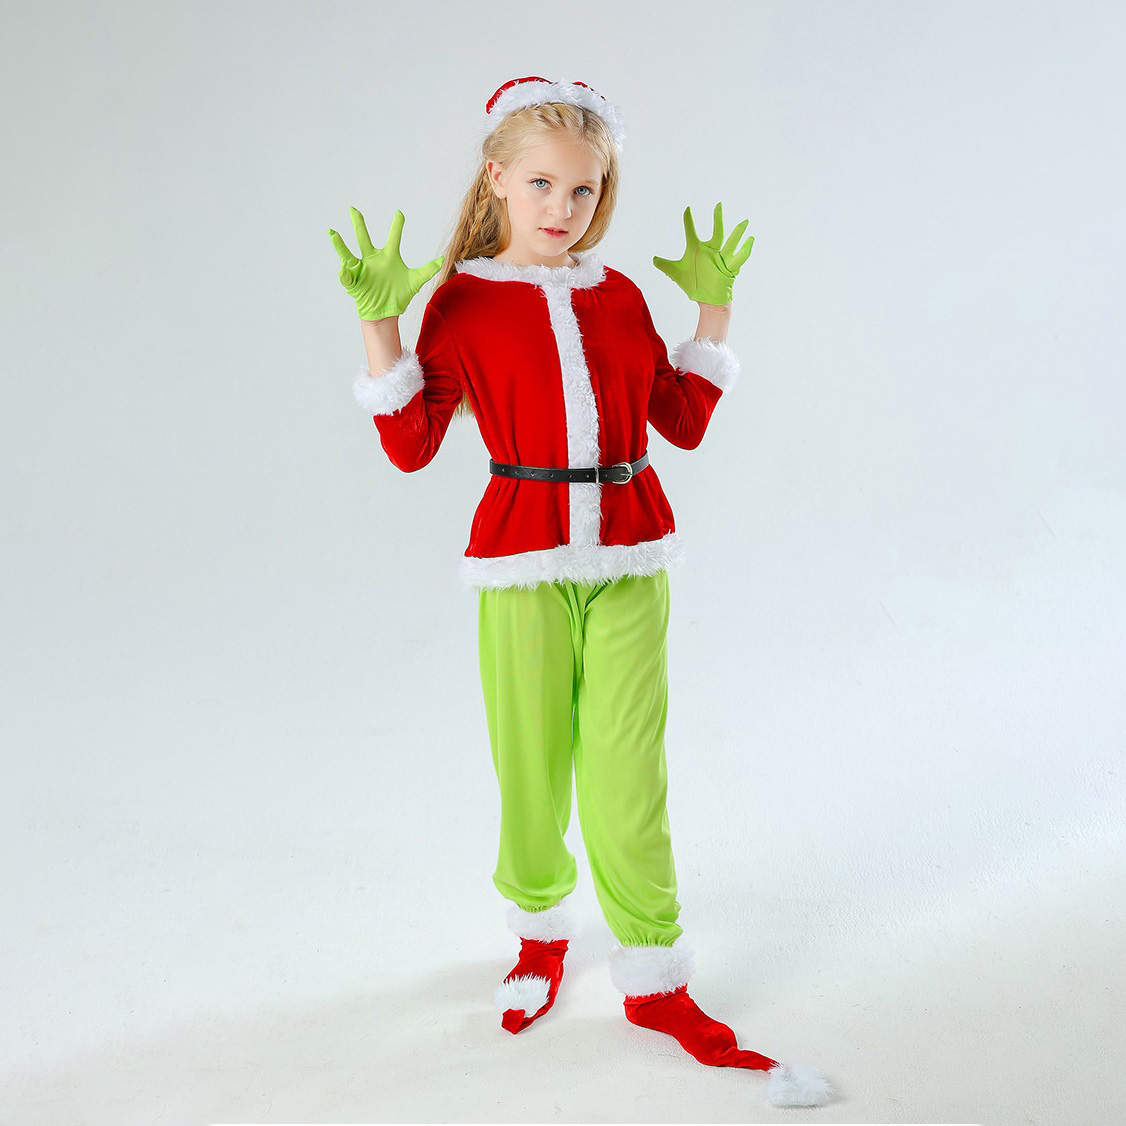 Grinch Costume Ideas For Christmas (Elegant Grinch costumes for adults,  kids, and infants), by Rentagrinchcostume